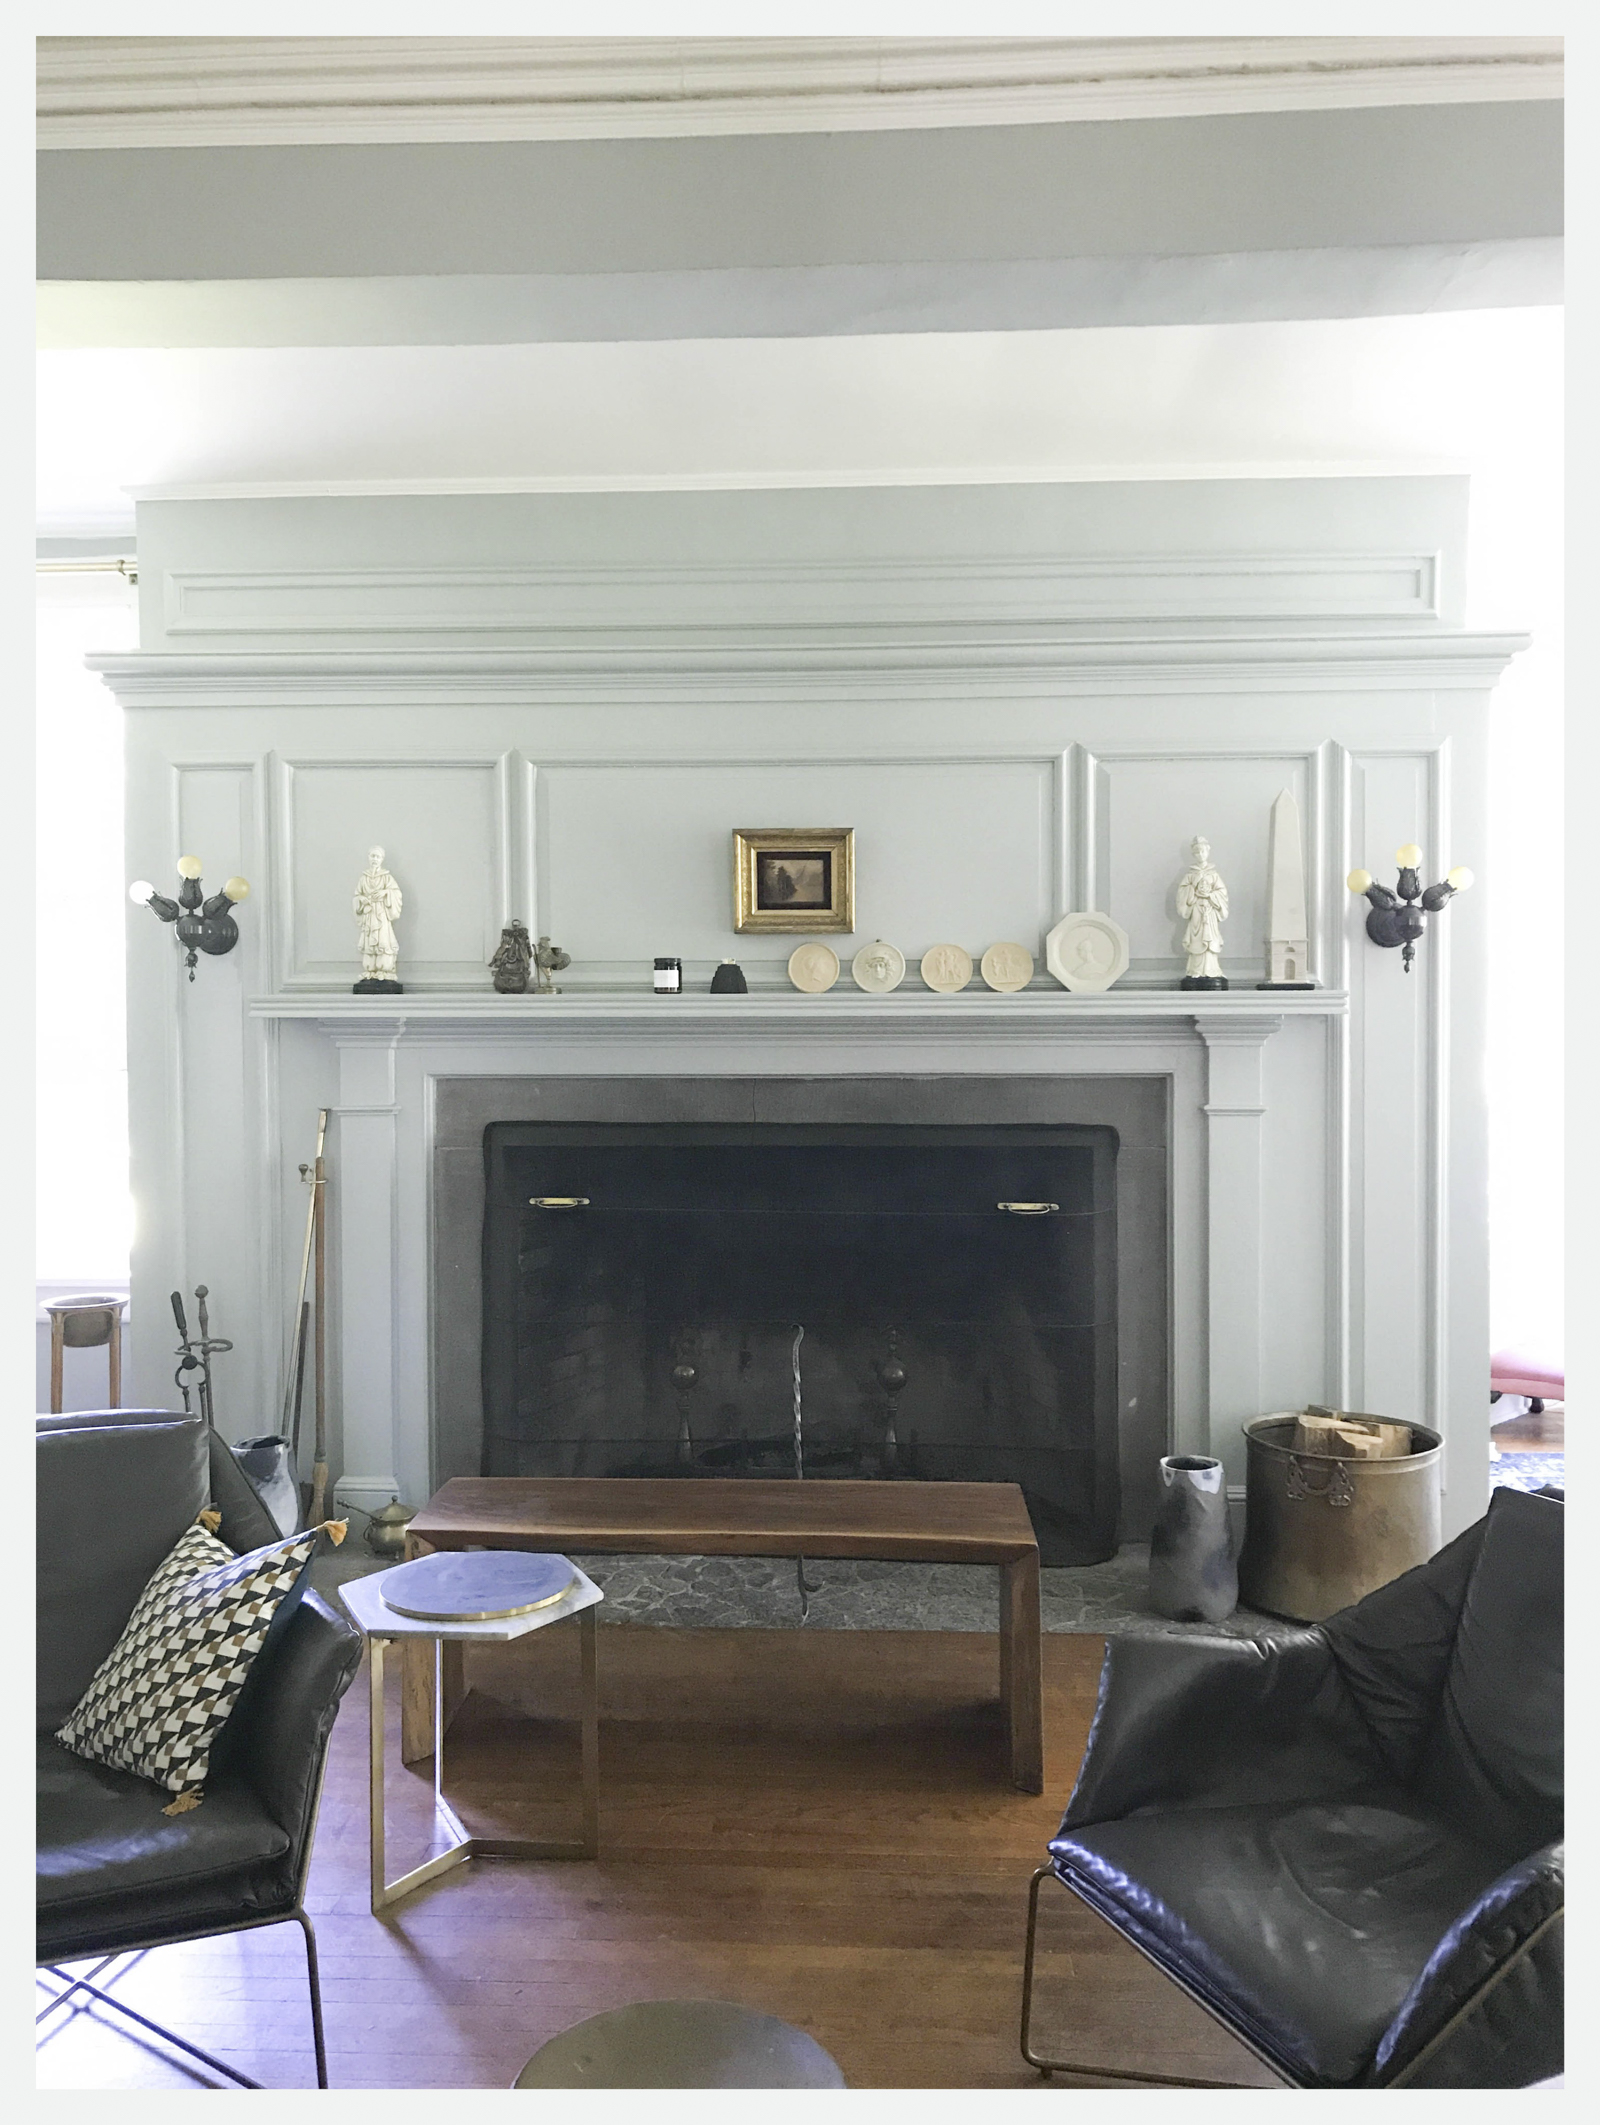 Before-The Fireplace Mantle